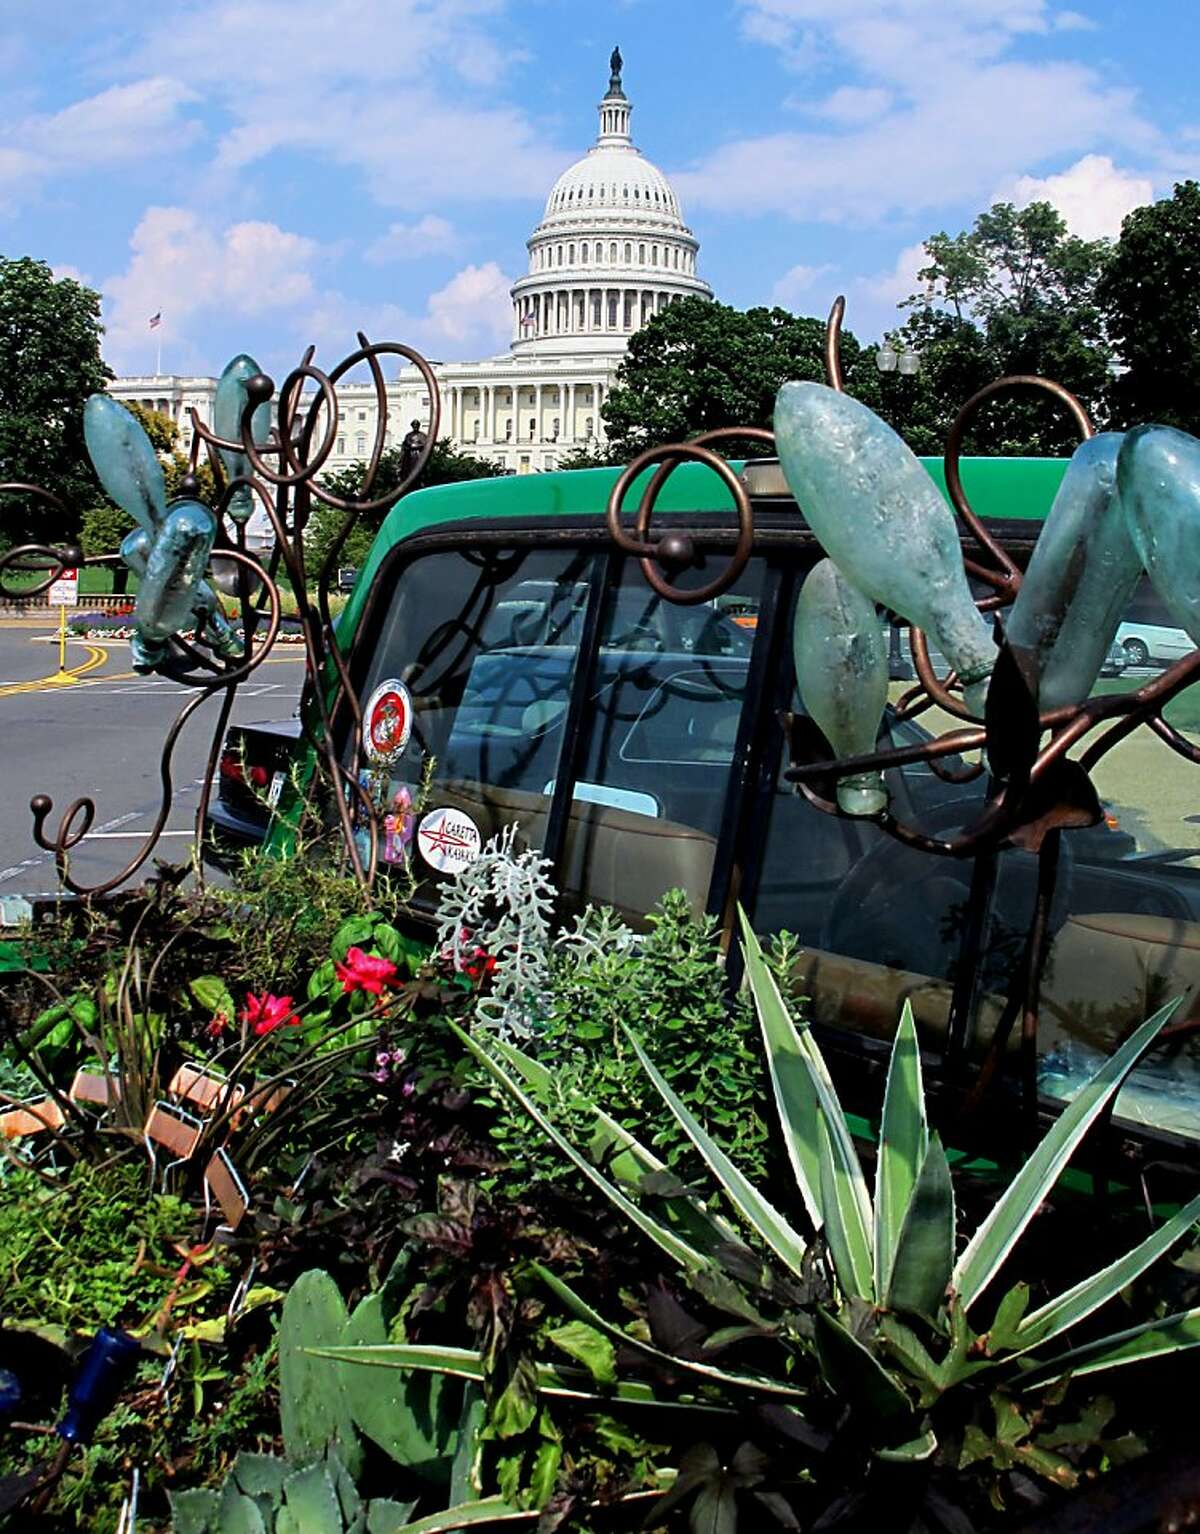 Slow Gardening 0813 Author Felder Rushing transformed the bed of his father's 1988 Ford F-150 pickup truck into a flower bed to prove that, yes, you can garden anywhere. His rolling garden, shown parked near the Capitol in Washington, D.C., is complete with bottle trees and wind chimes. Credit: Felder Rushing